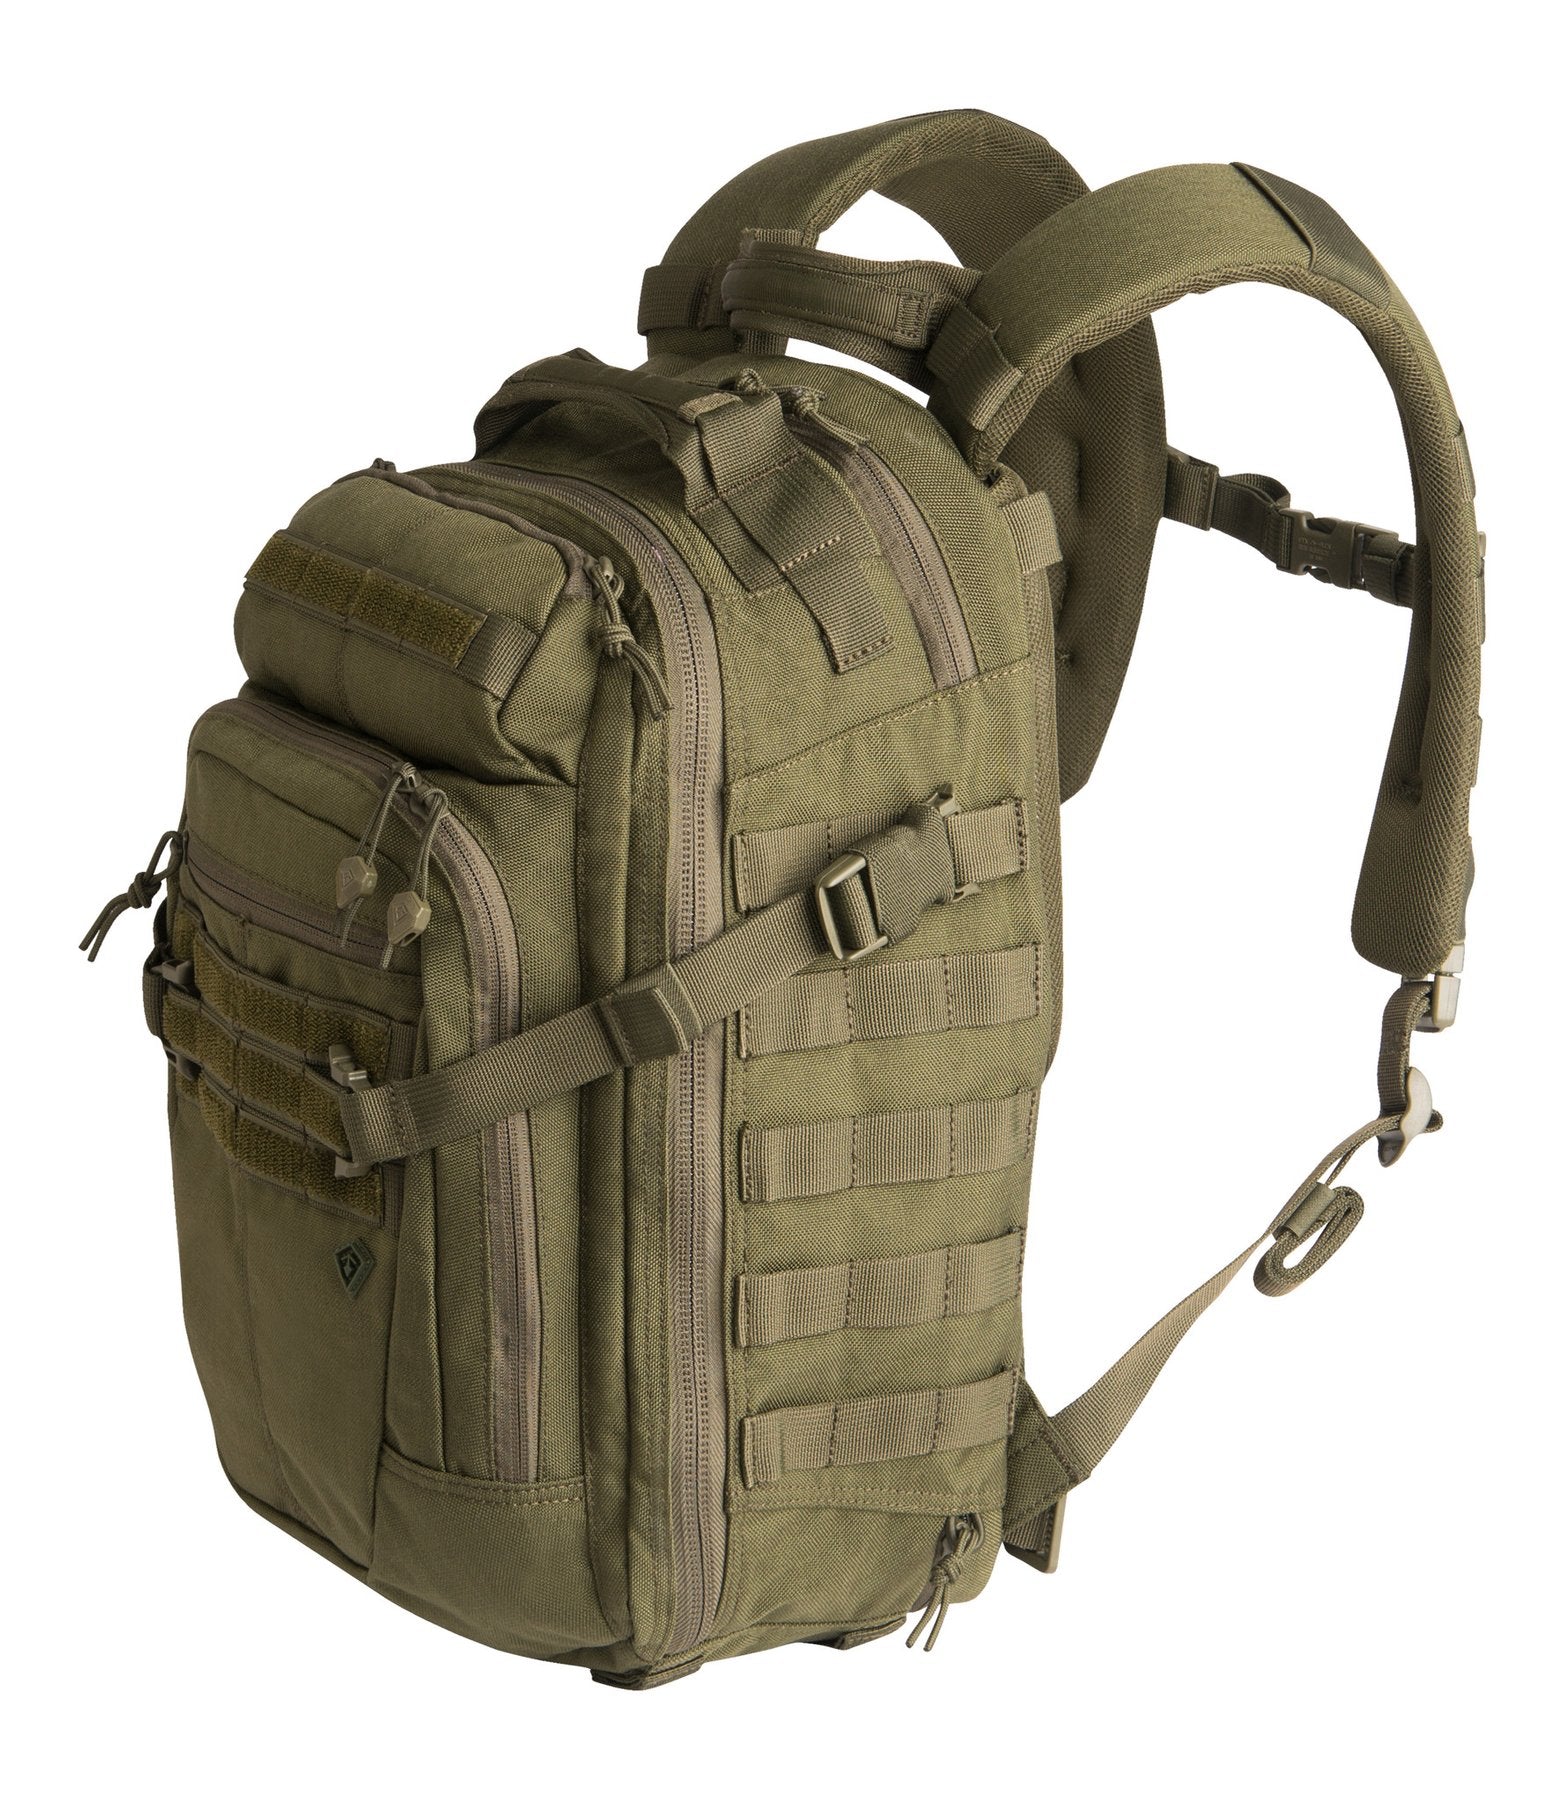 Specialist Half-Day Backpack 25L (180006) Black, Coyote, OD Green